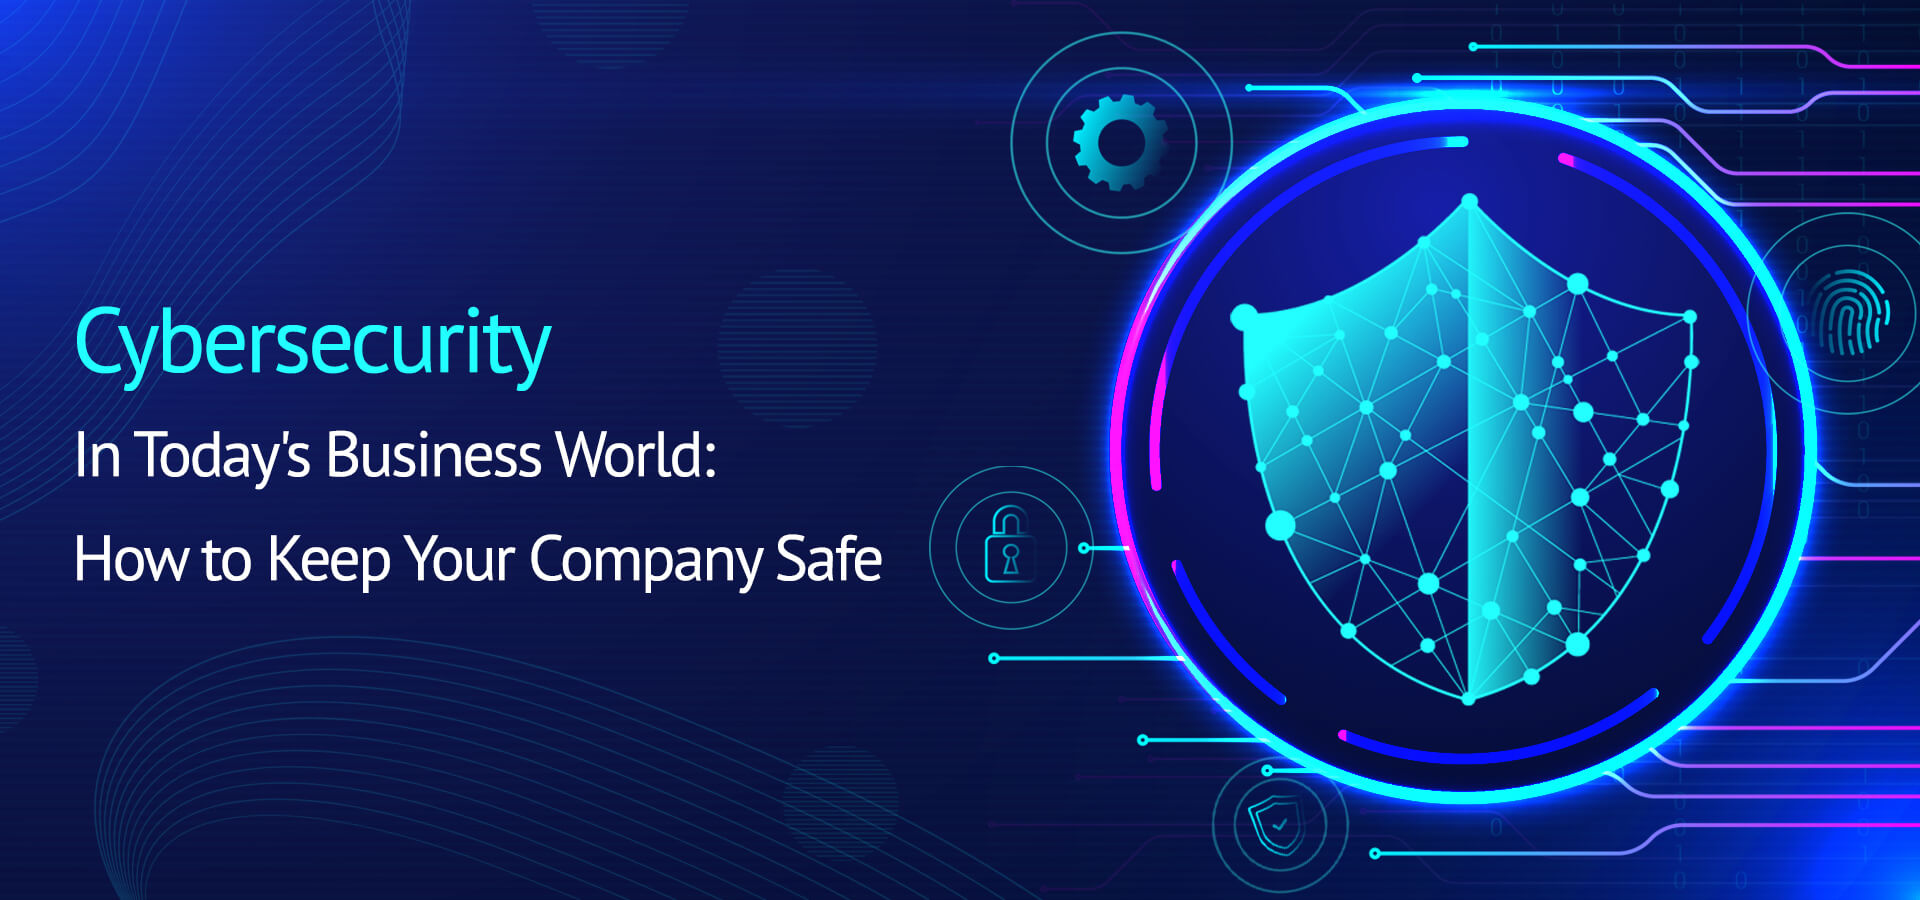 Cybersecurity in Today's Business World: How to Keep Your Company Safe